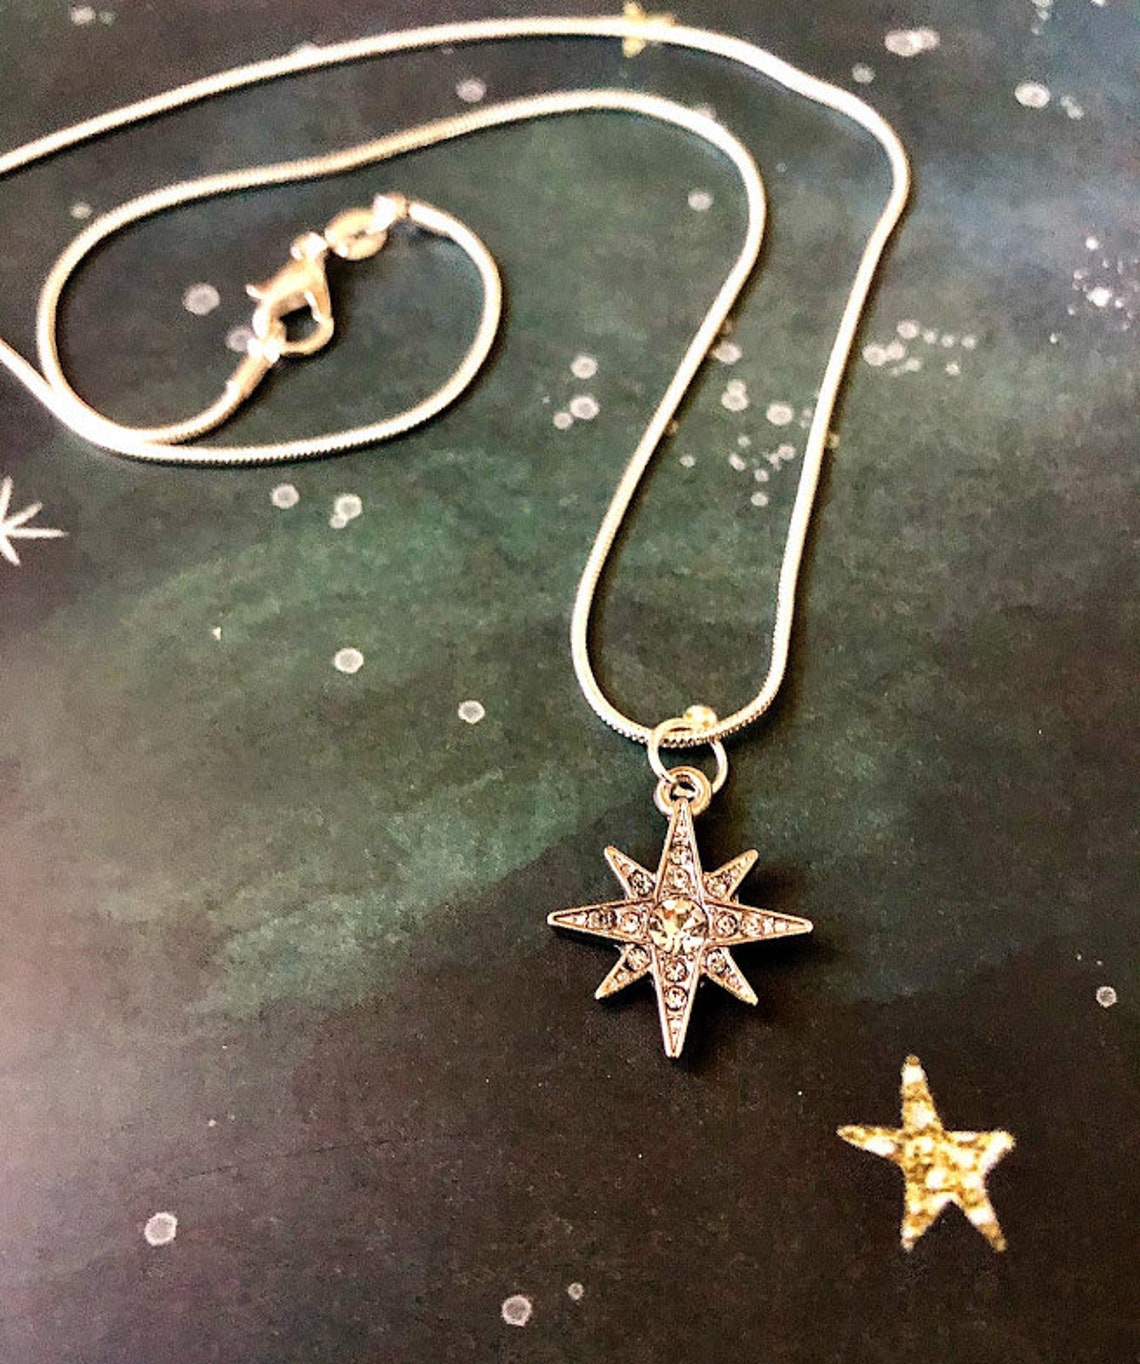 Northern Star Necklace | Etsy